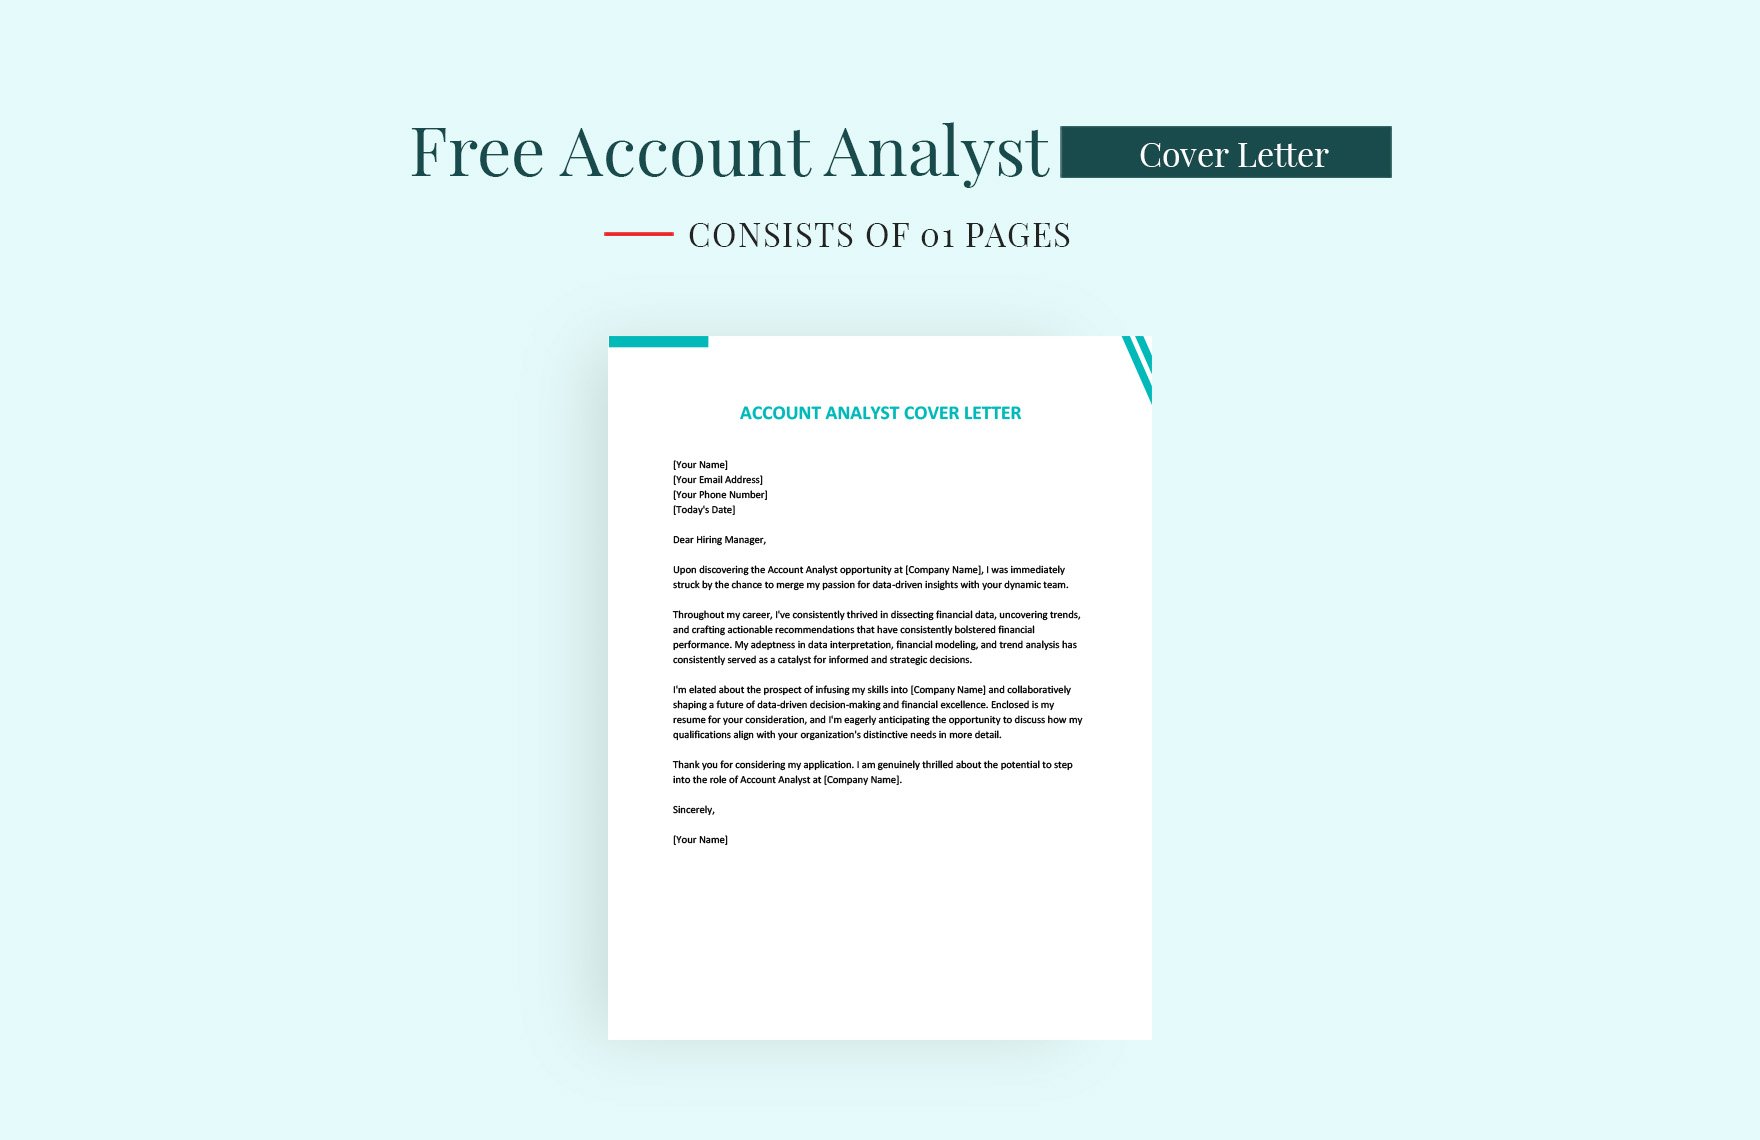 Account Analyst Cover Letter in Word, Google Docs